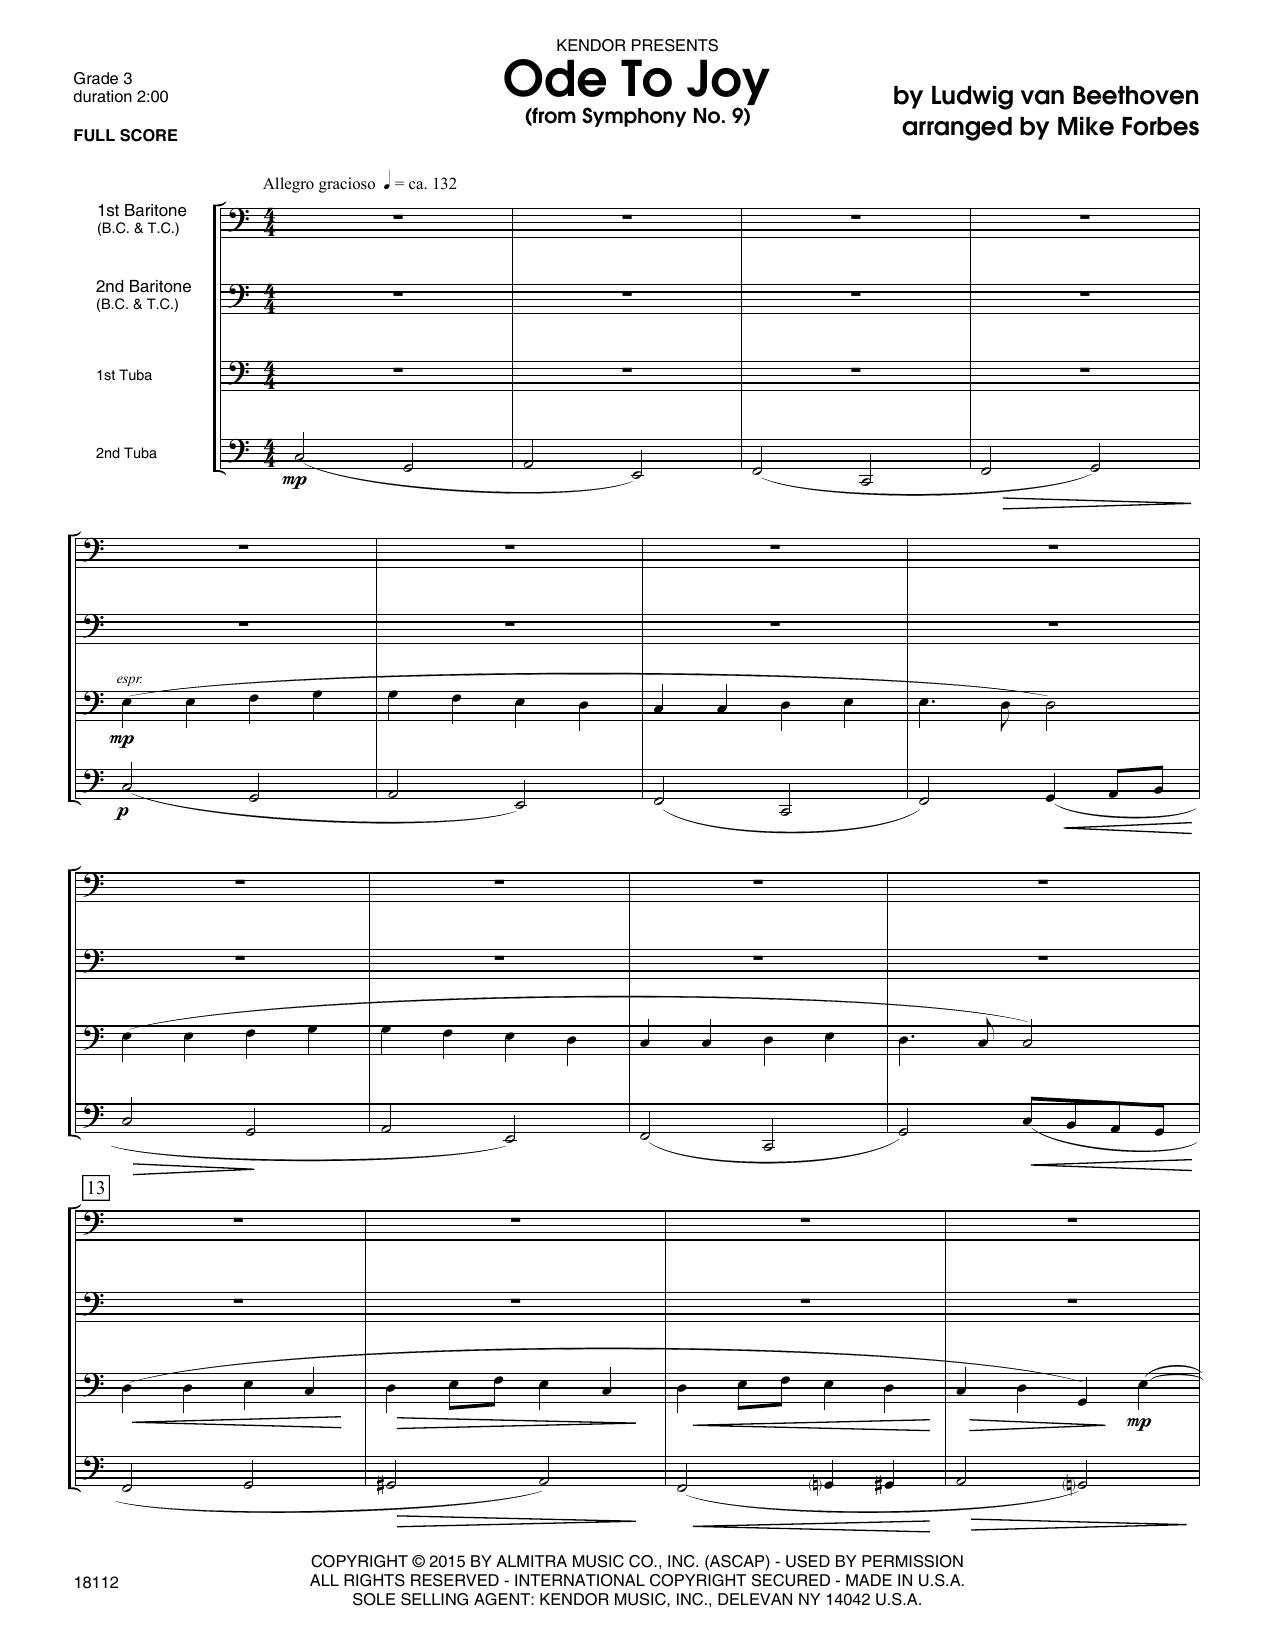 Download Michael Forbes Ode To Joy (from Symphony No. 9) - Full Sheet Music